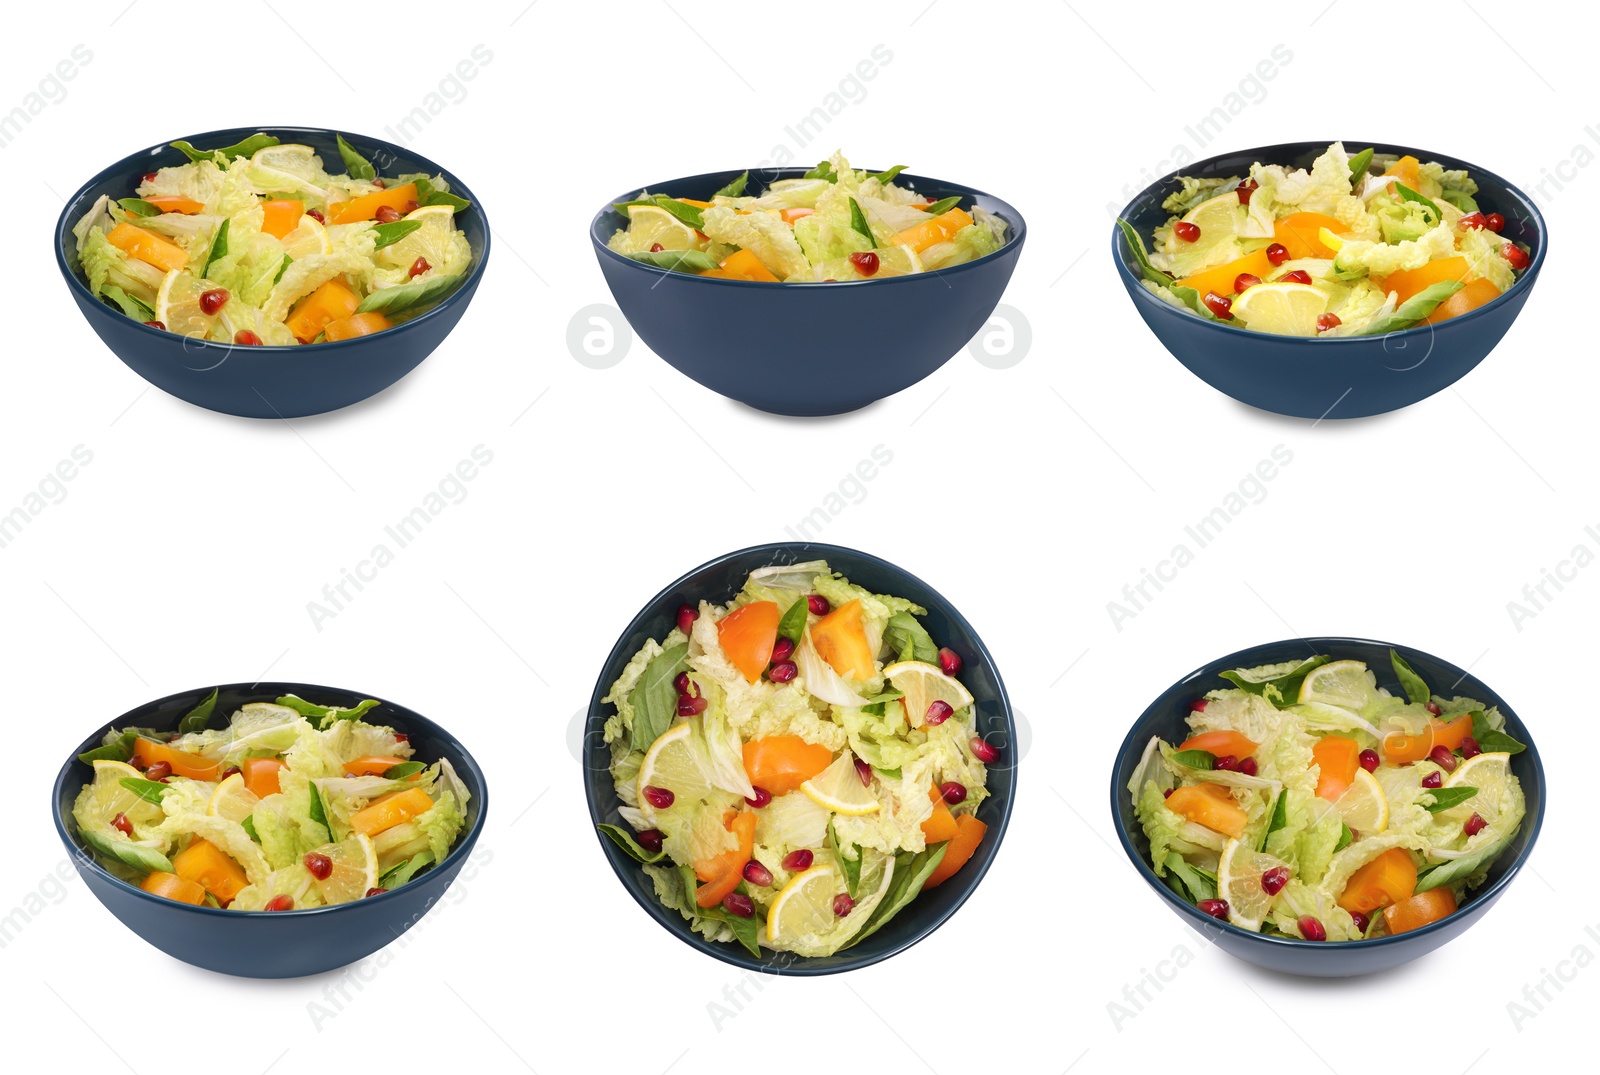 Image of Bowl of delicious salad with Chinese cabbage, lemon, persimmon and pomegranate seeds on white background, different sides